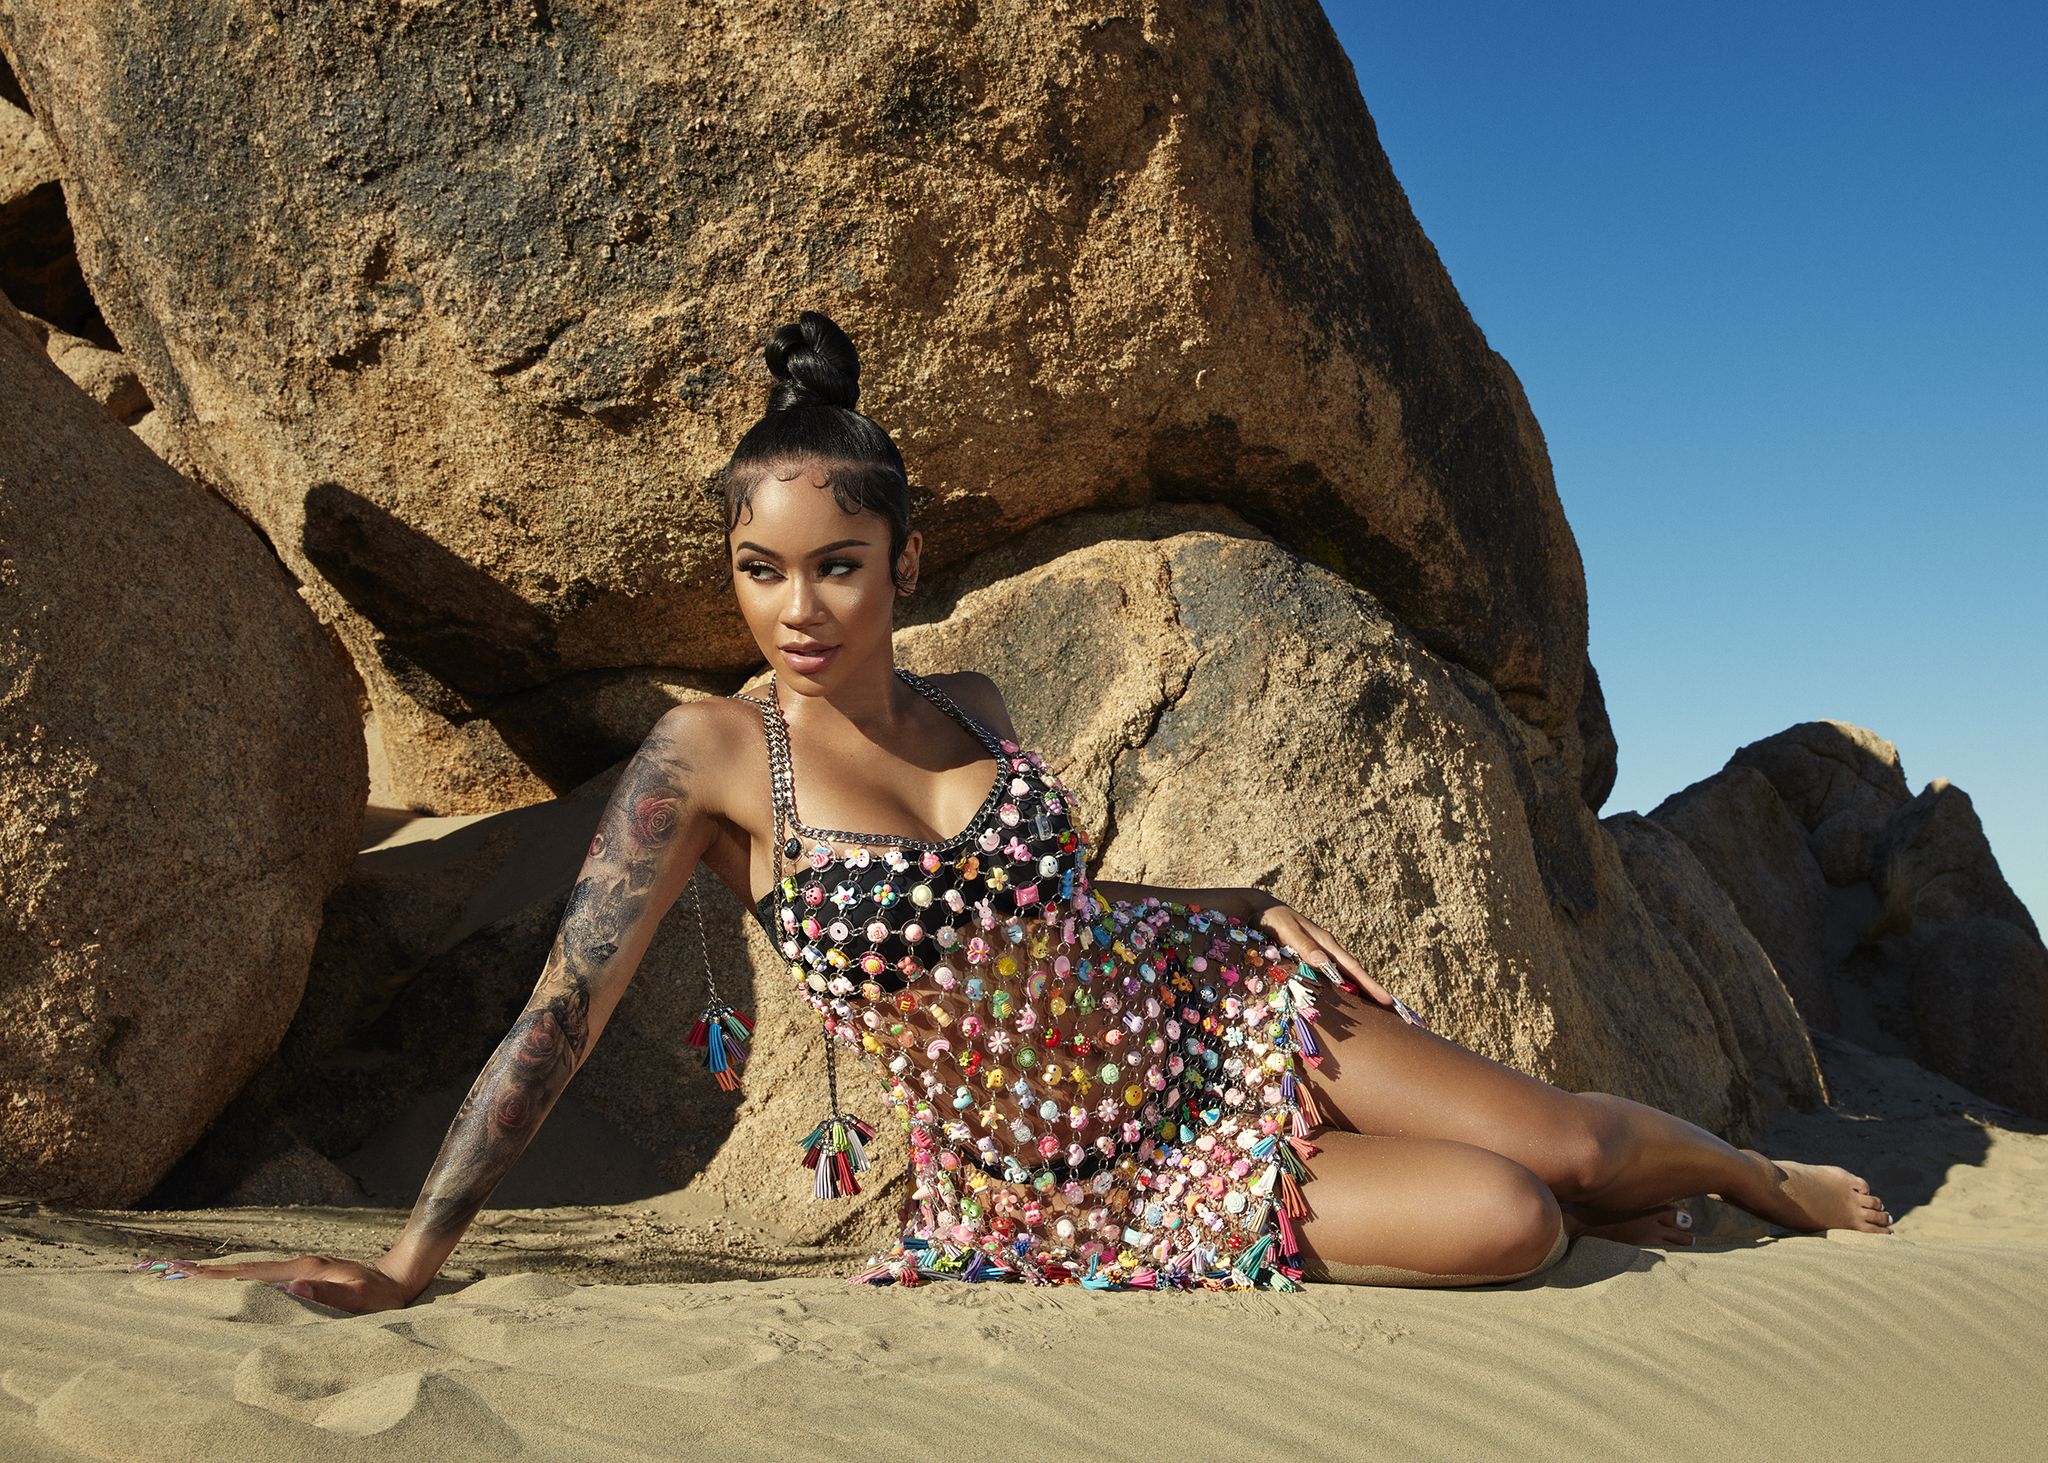 singer saweetie propped up with arm lying down on sand, wearing a colorful chain dress, in front of a desert and sky background